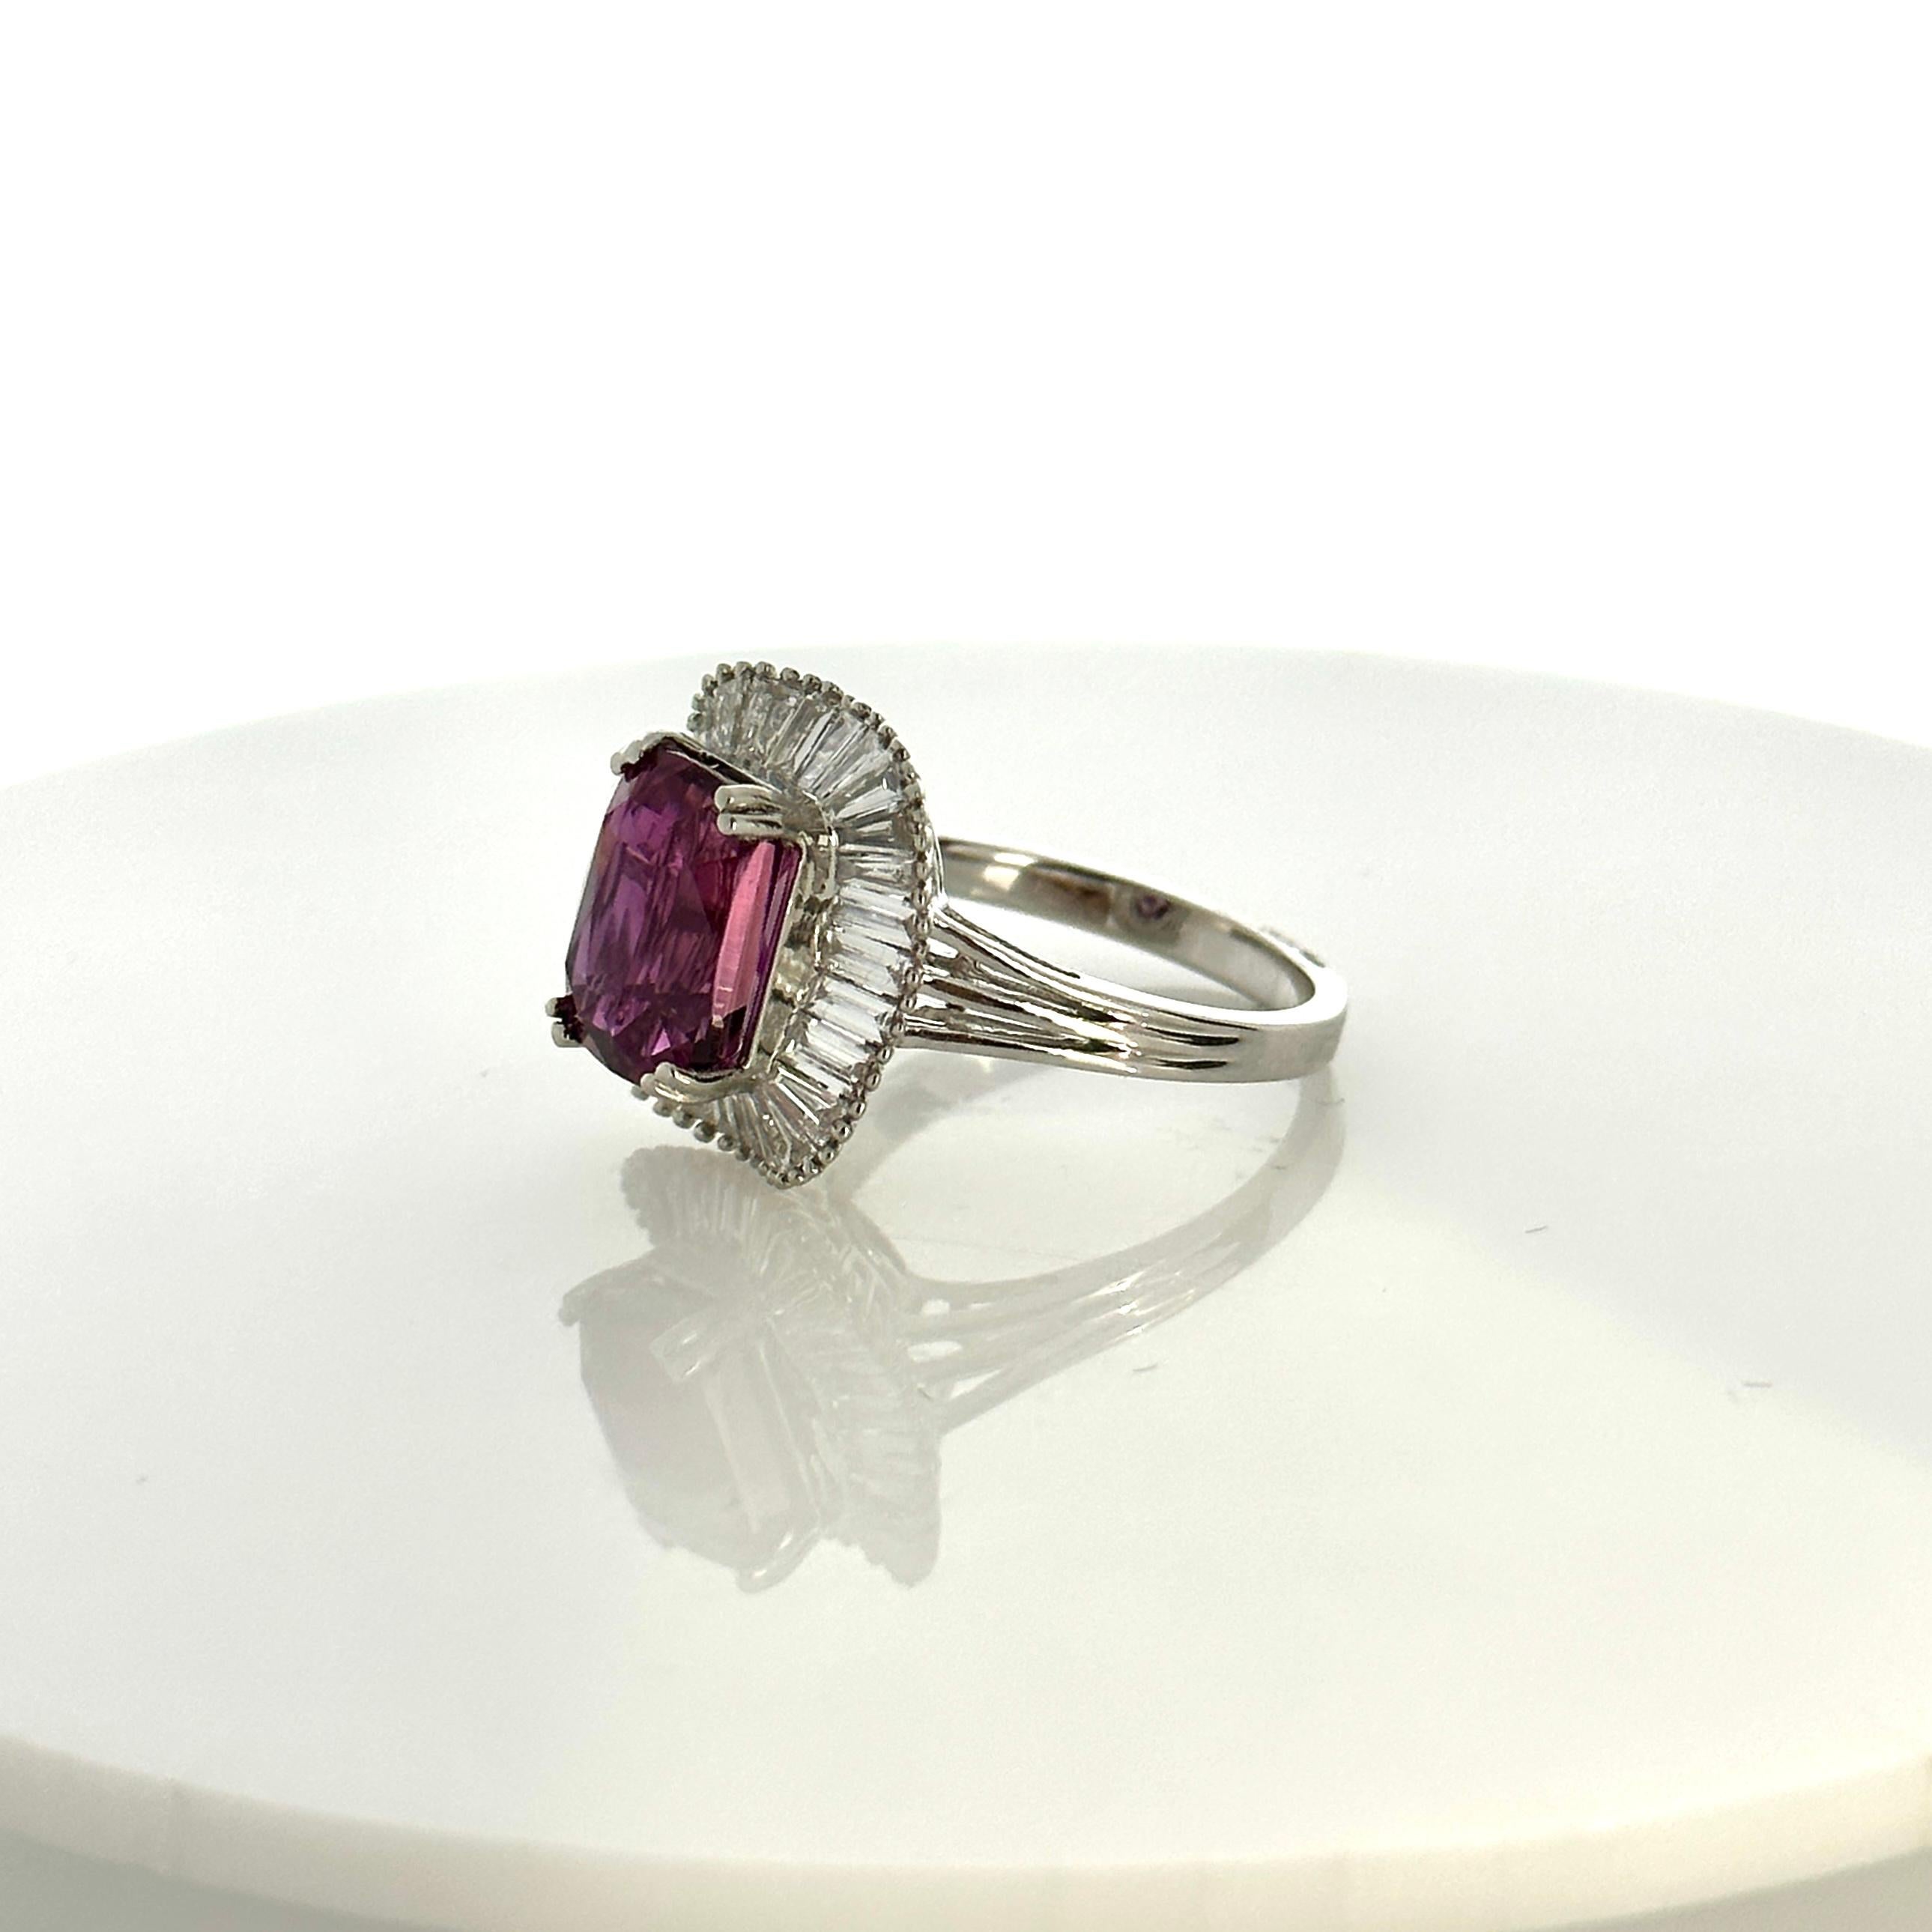 This piece consists of a 5.14 carats ruby and is accompanied by 29 natural diamonds that total up to 2.10 carats. It is set in 18K White Gold.